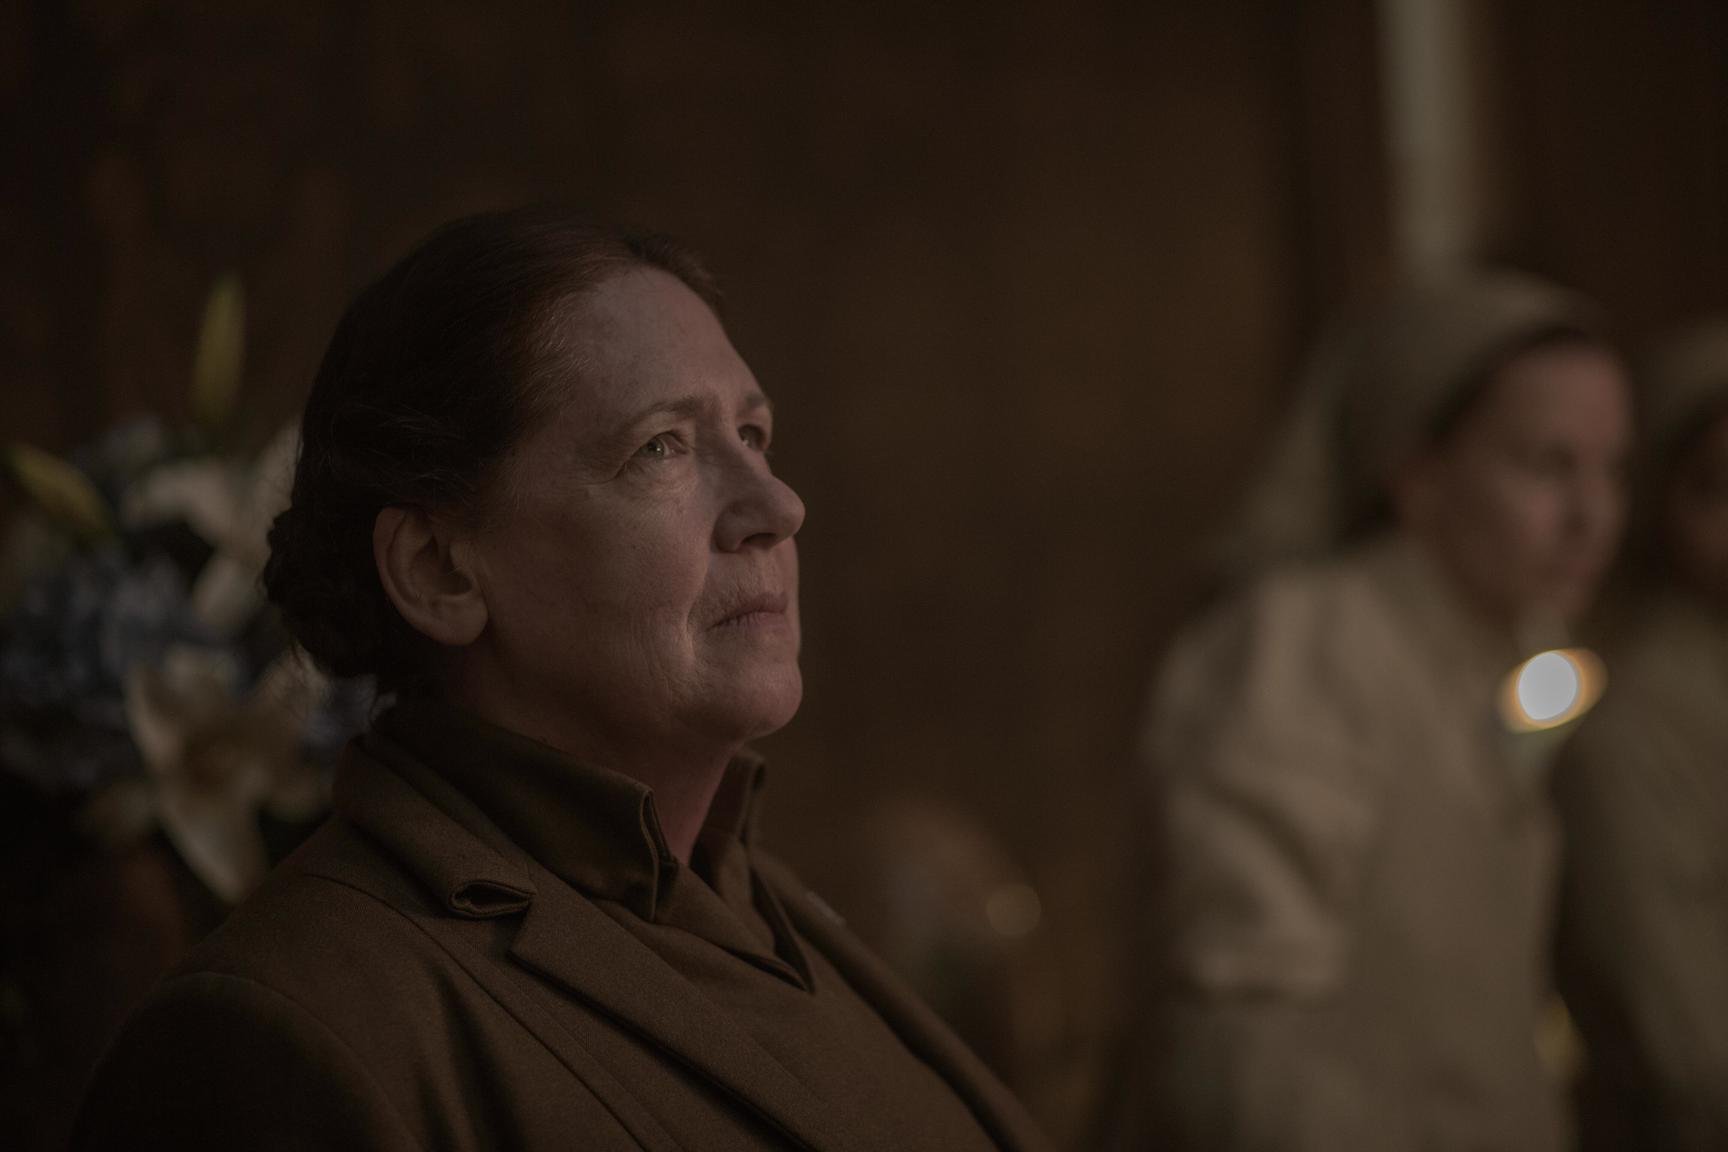 Ann Dowd, a member of 'The Handmaid's Tale' Season 4 cast, playing Aunt Lydia. Aunt Lydia is looking up as someone speaks to her